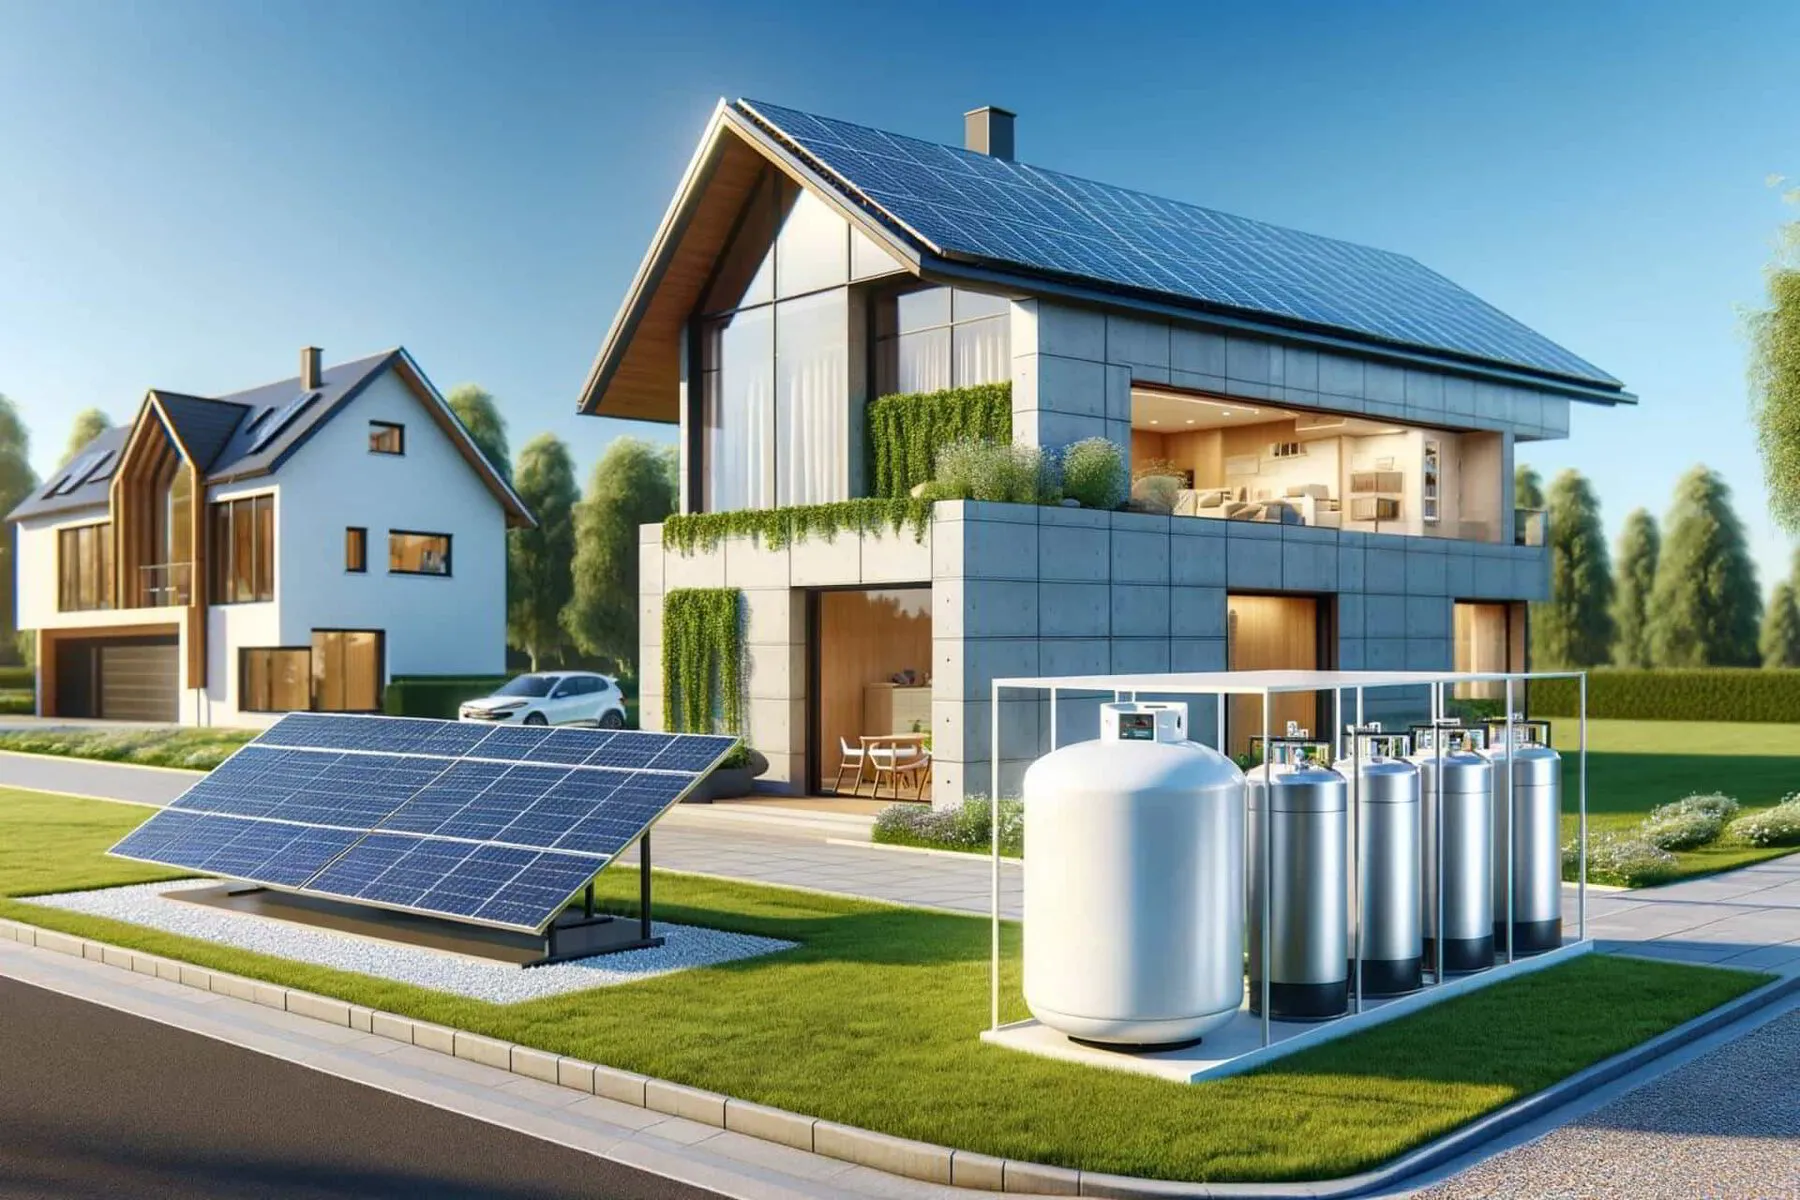 New home with solar and hydrogen storage